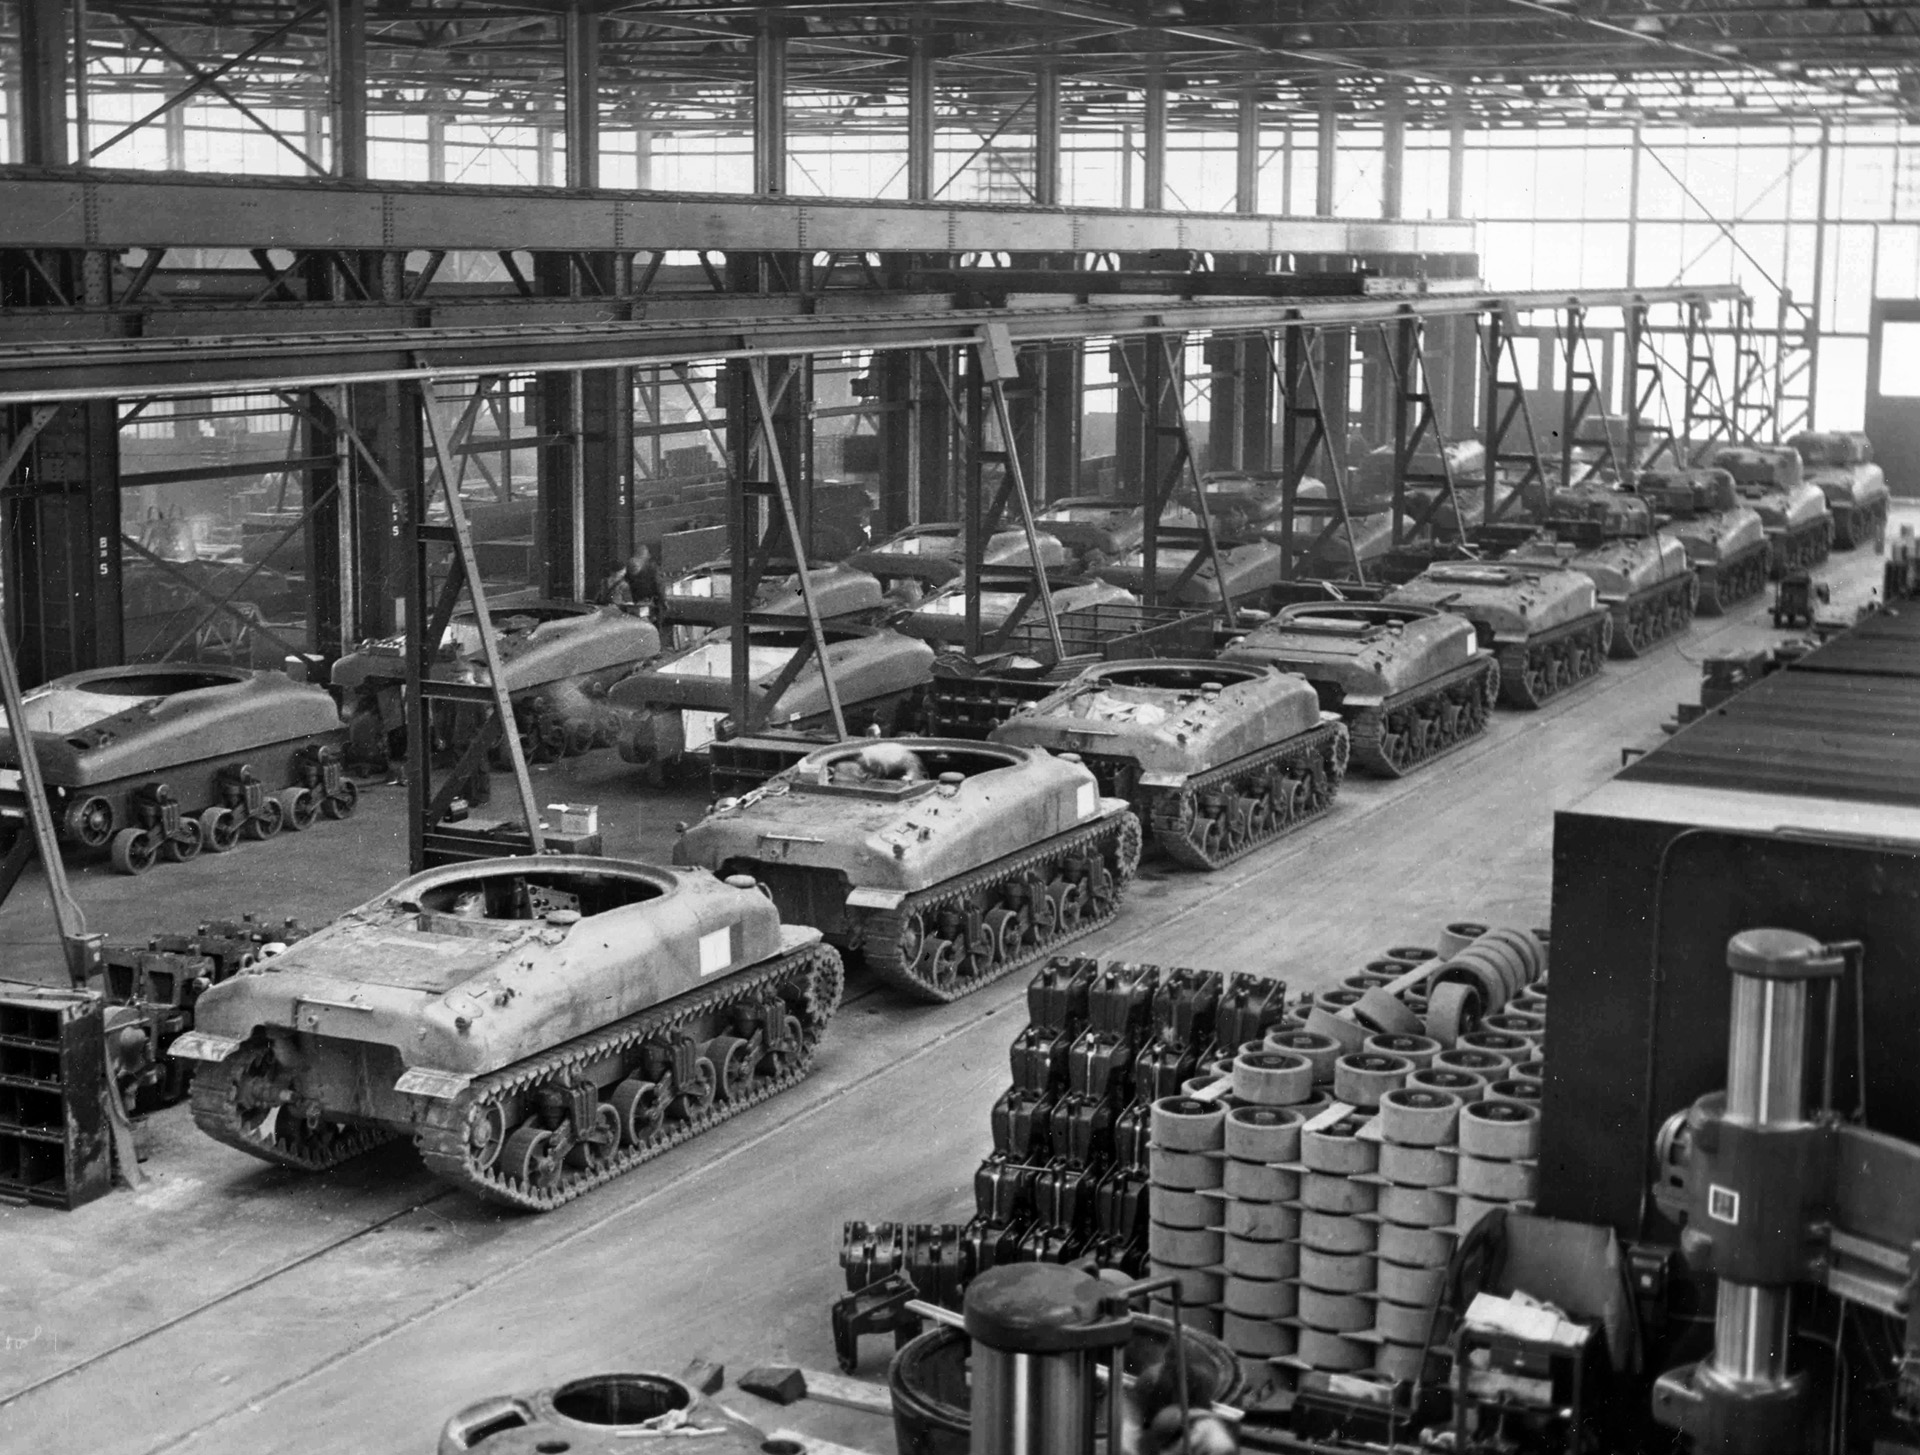 M4 Sherman tanks proceed down the assembly line at the Lima Locomotive Works in Ohio in 1942. The plant was the first to produce the Sherman, completing a total of 1,655 tanks during the war years.